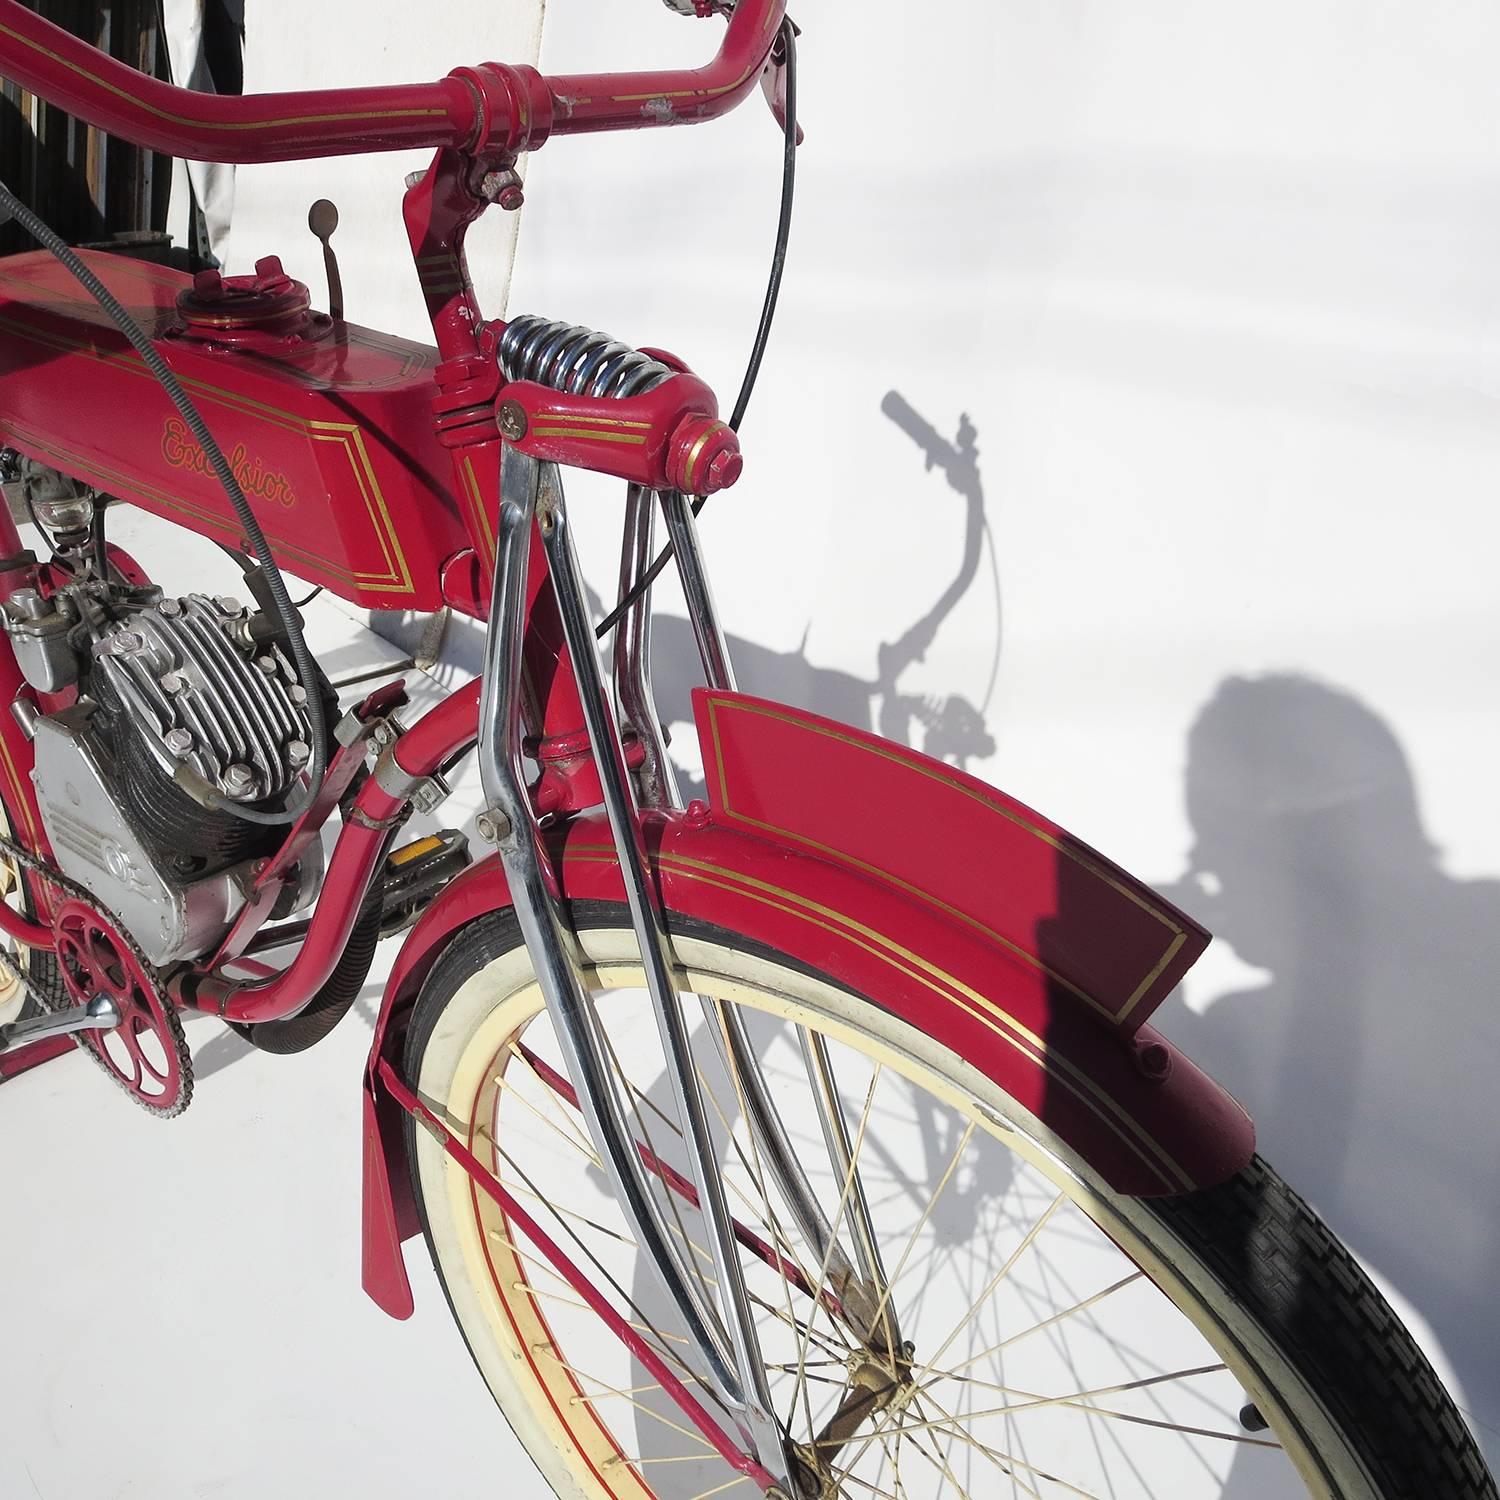 Introduced in 1939, the Whizzer was sold in a kit that could be adapted to a standard bicycle. It wasn't until 1948 that the company introduced a fully built and completed motorized bicycle. However, times and trends changed, and the Whizzer company